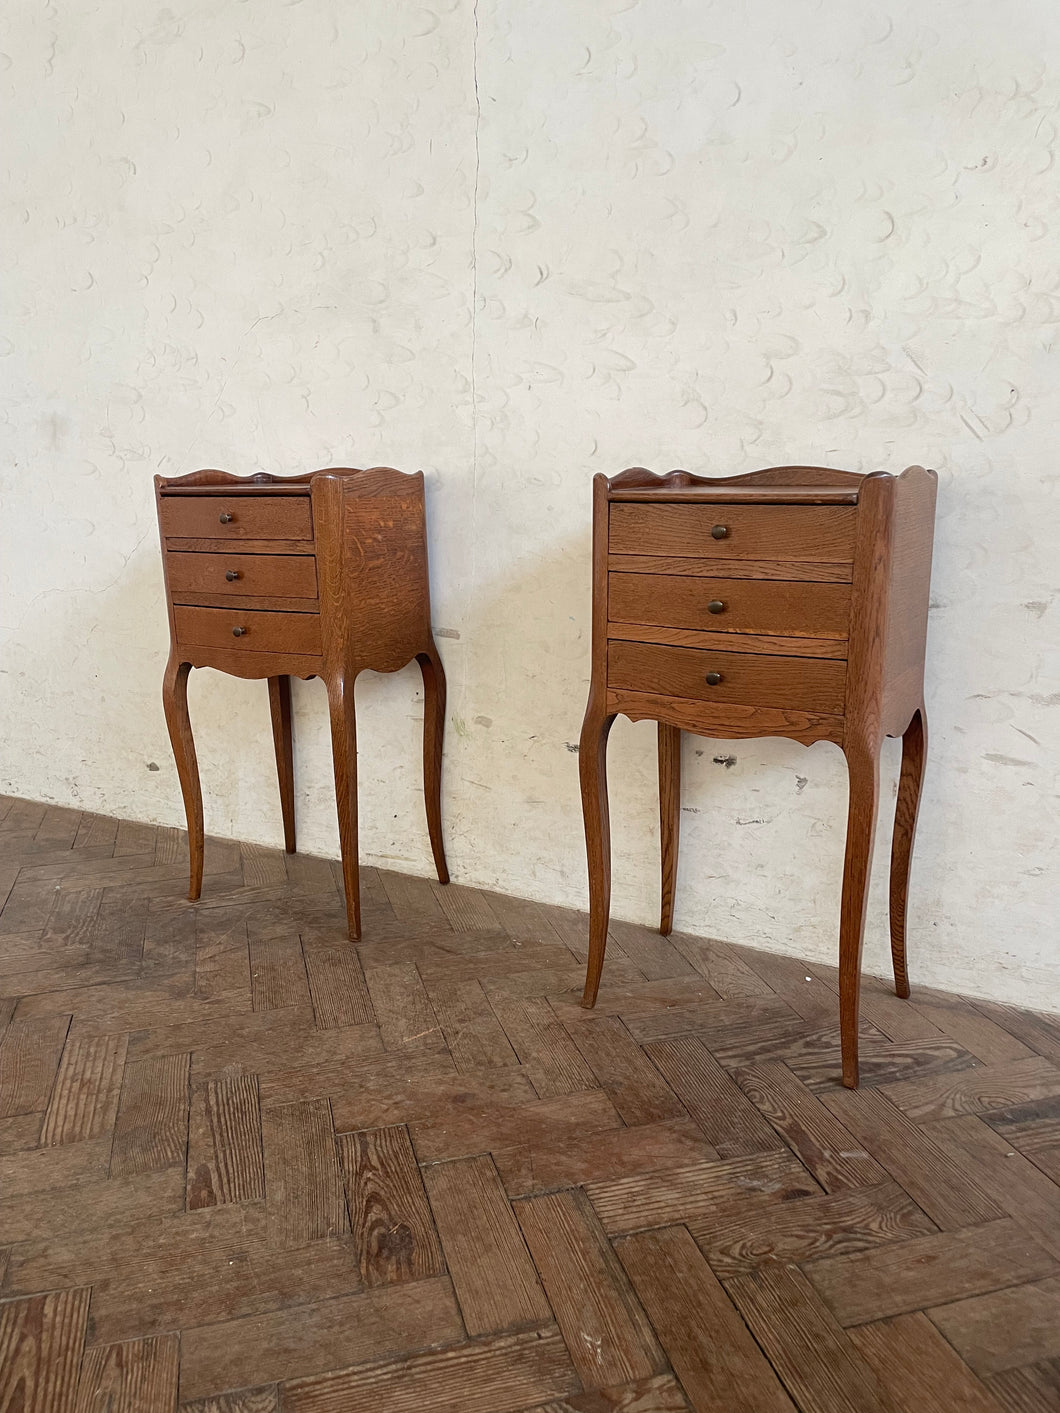 Antique French Bedside Tables *ON HOLD*